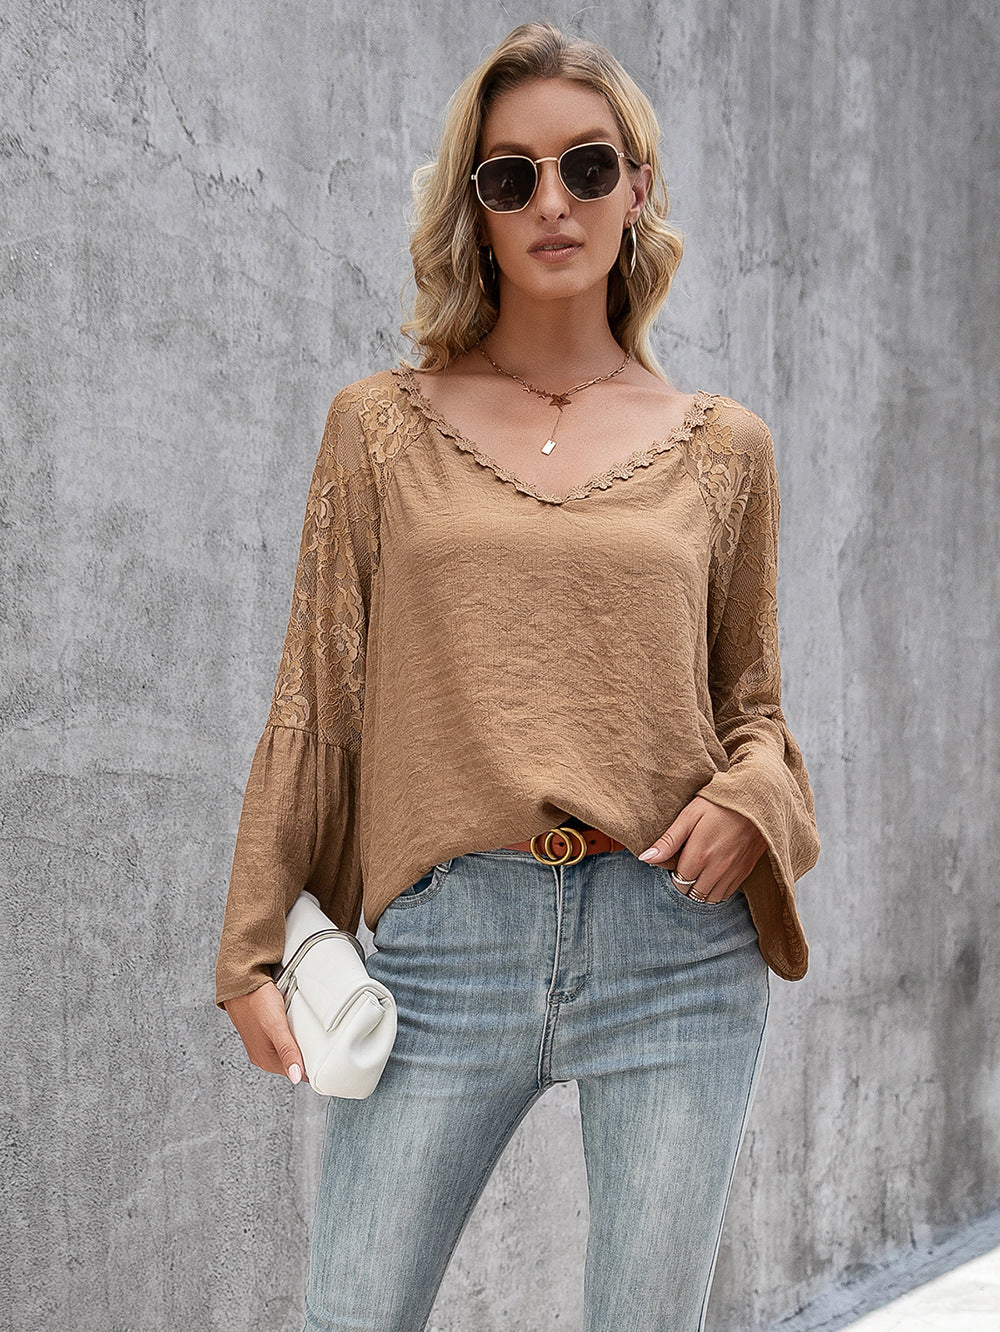 Women Clothing Solid Color Stitching Lace Cutout V neck Long Sleeve Top Women